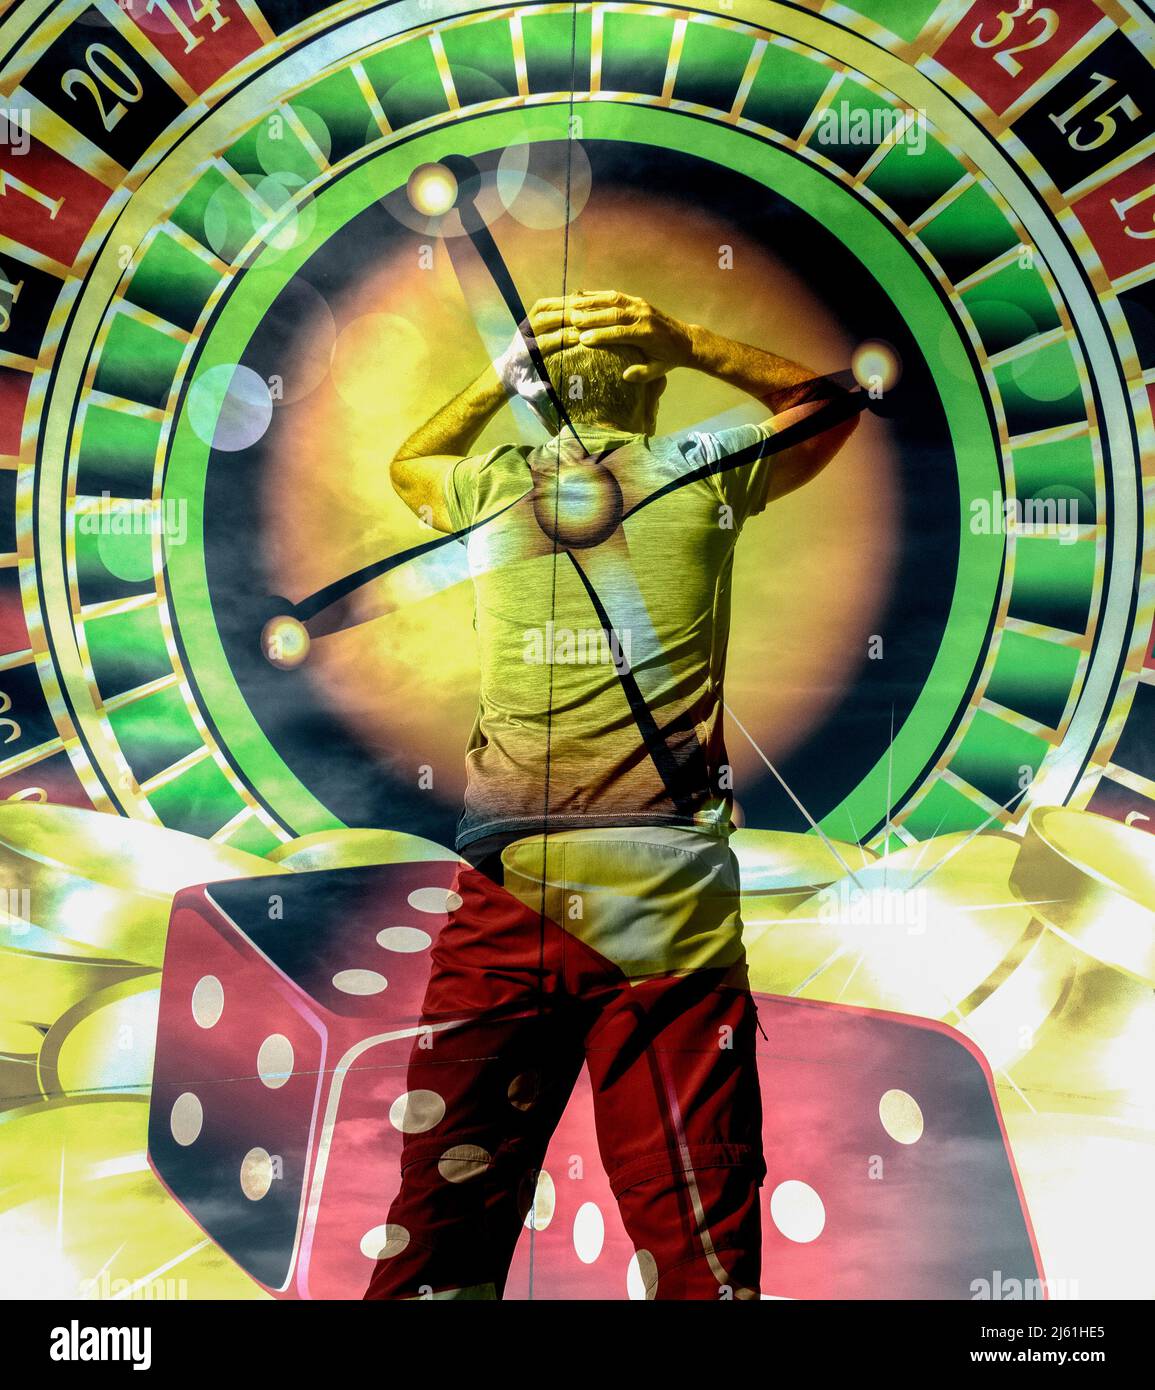 Rear view of man with hands on head overlayed on roulette wheel. Gambling, debt, addiction... Stock Photo